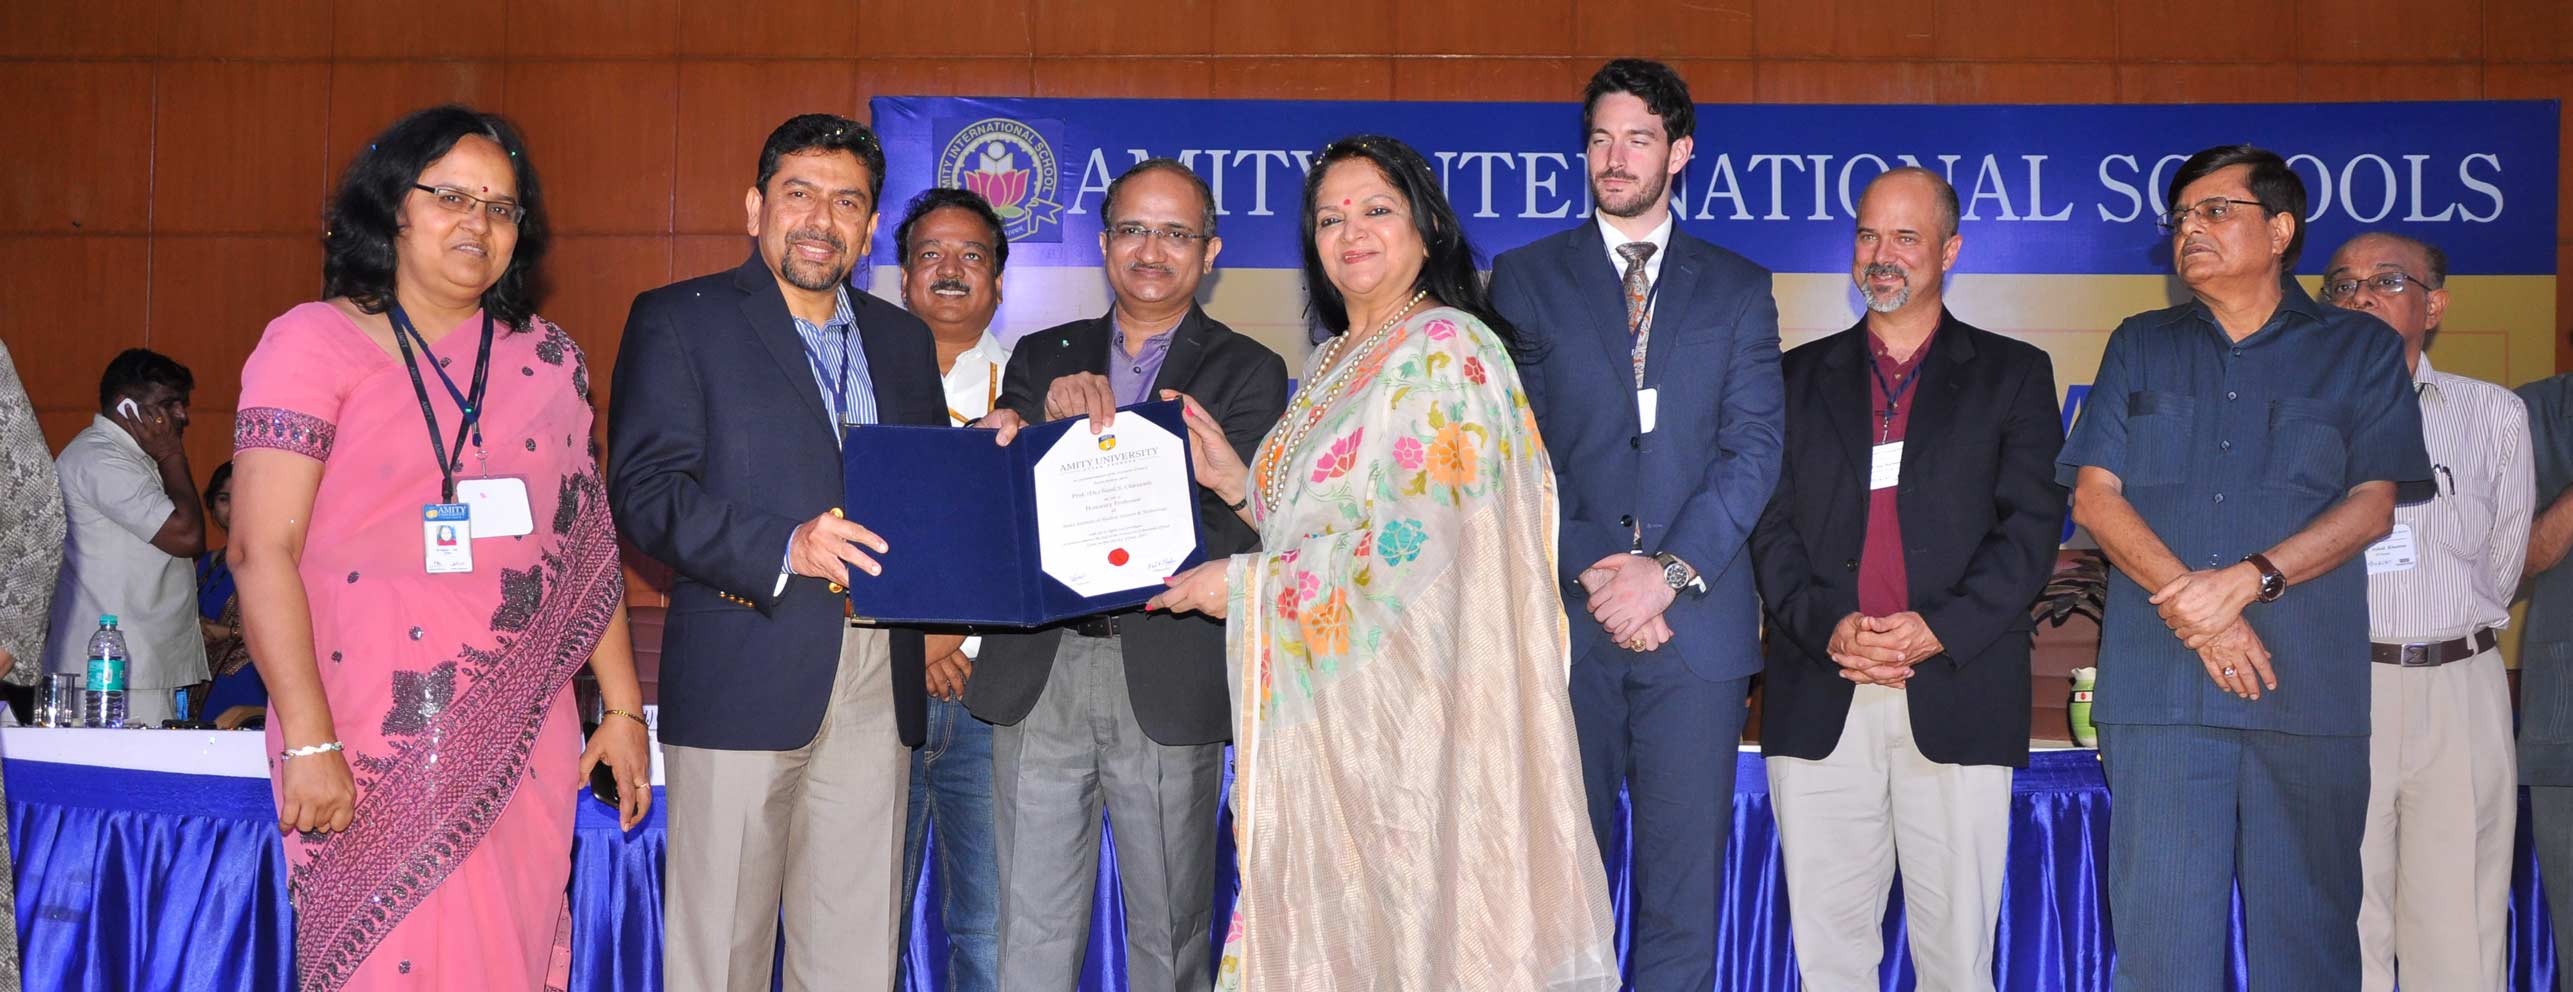 Chirayath recognized as honorary professor at Amity University in India